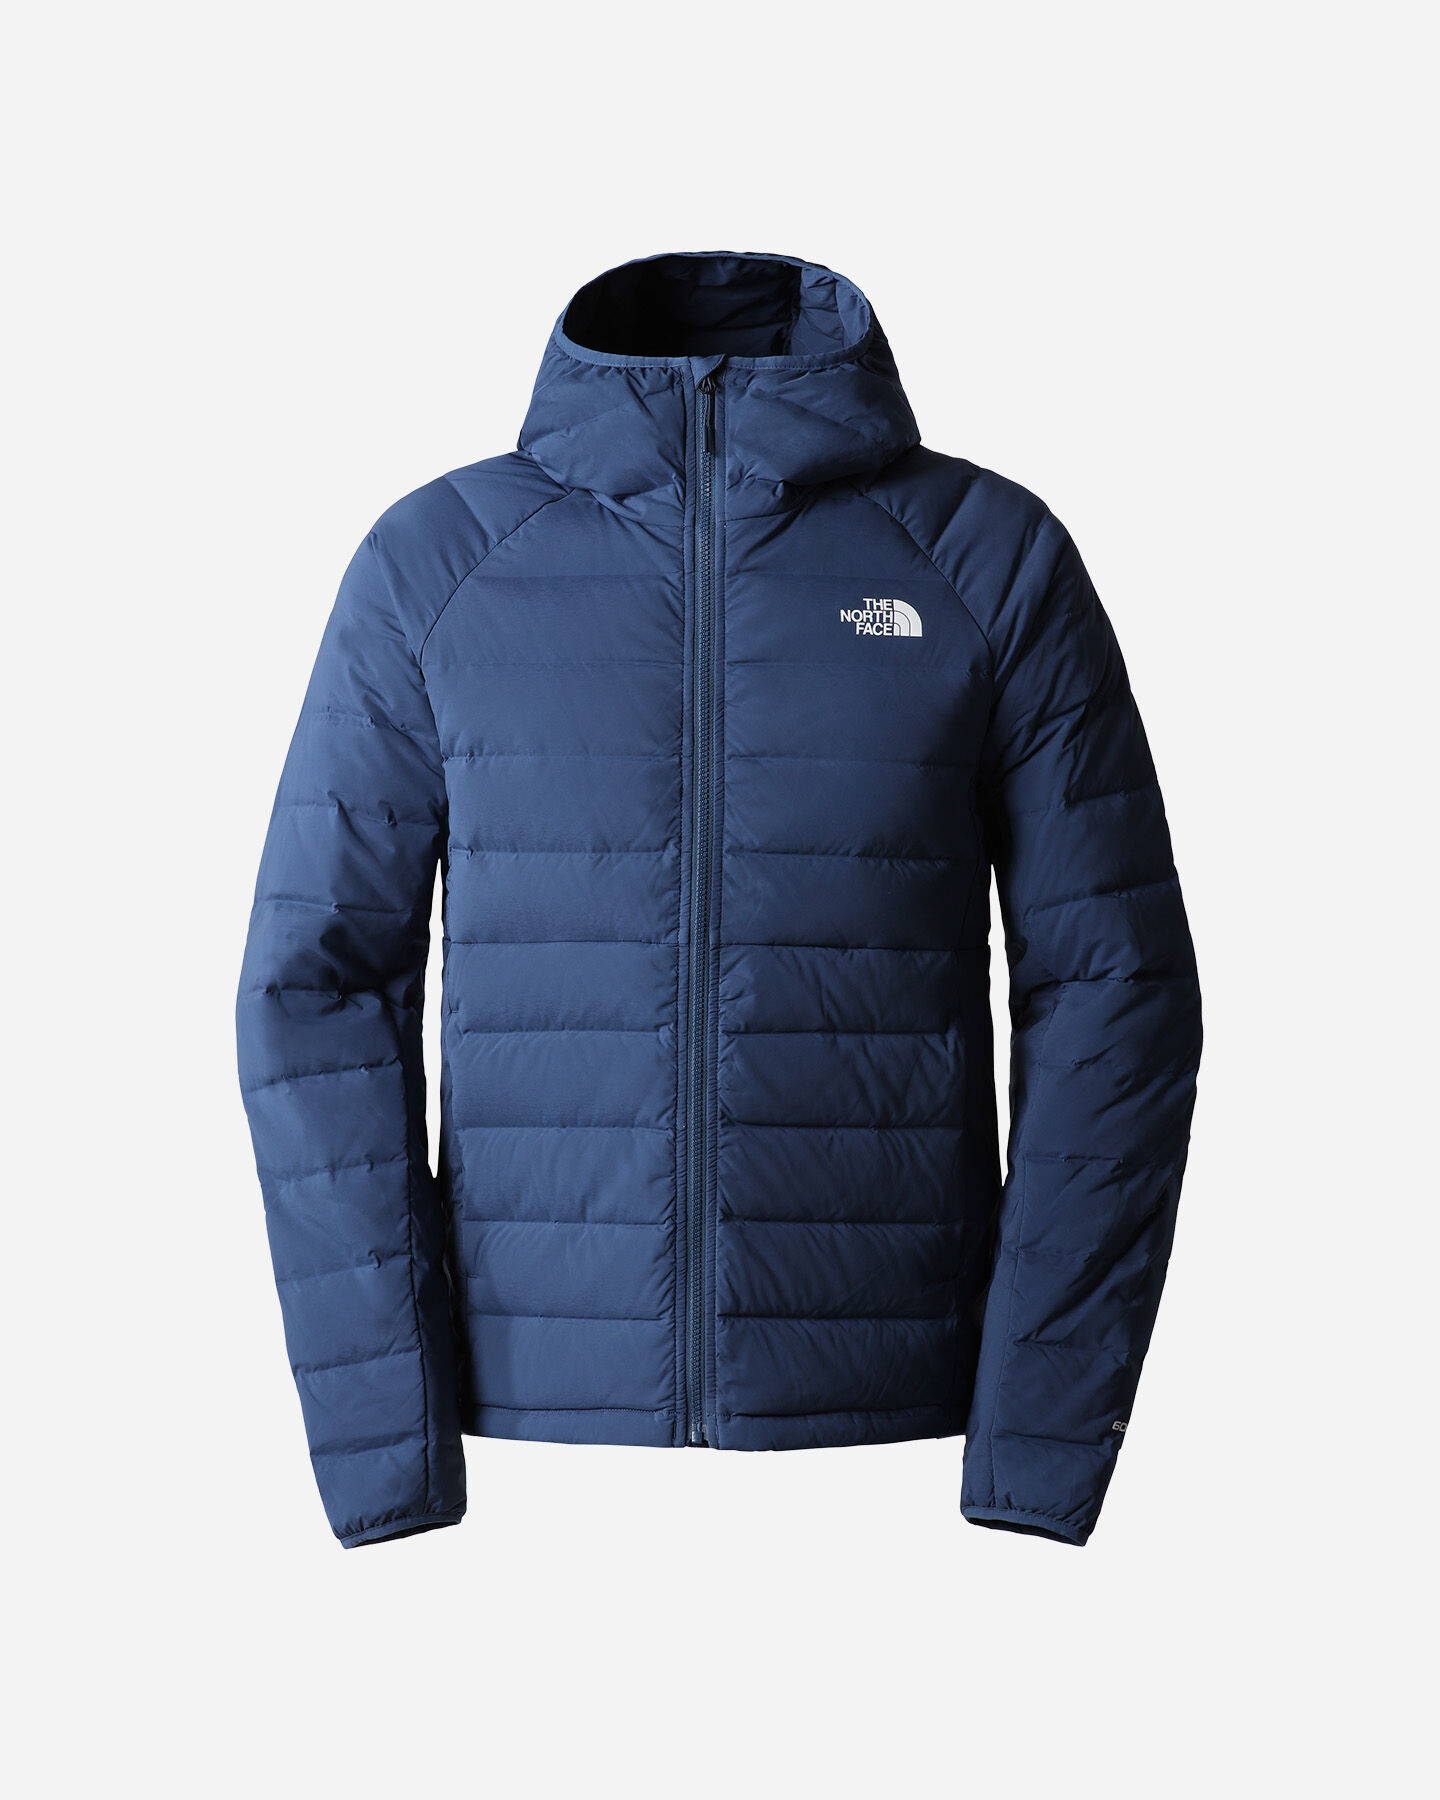  Giubbotto THE NORTH FACE BELLEVIEW M S5475276|HDC|S scatto 0